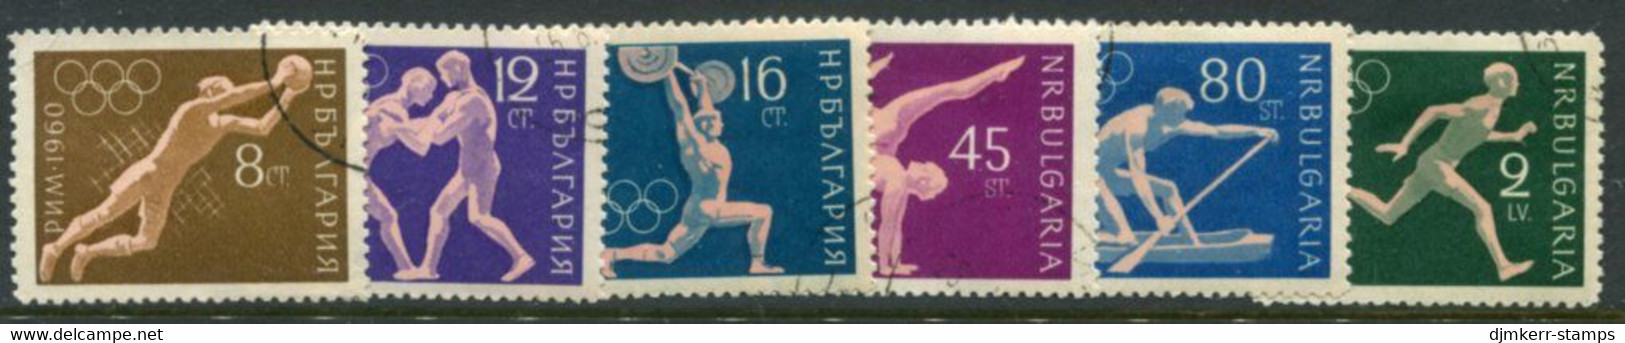 BULGARIA 1960 Olympic Games Perforated Used.  Michel 1172-77 - Oblitérés